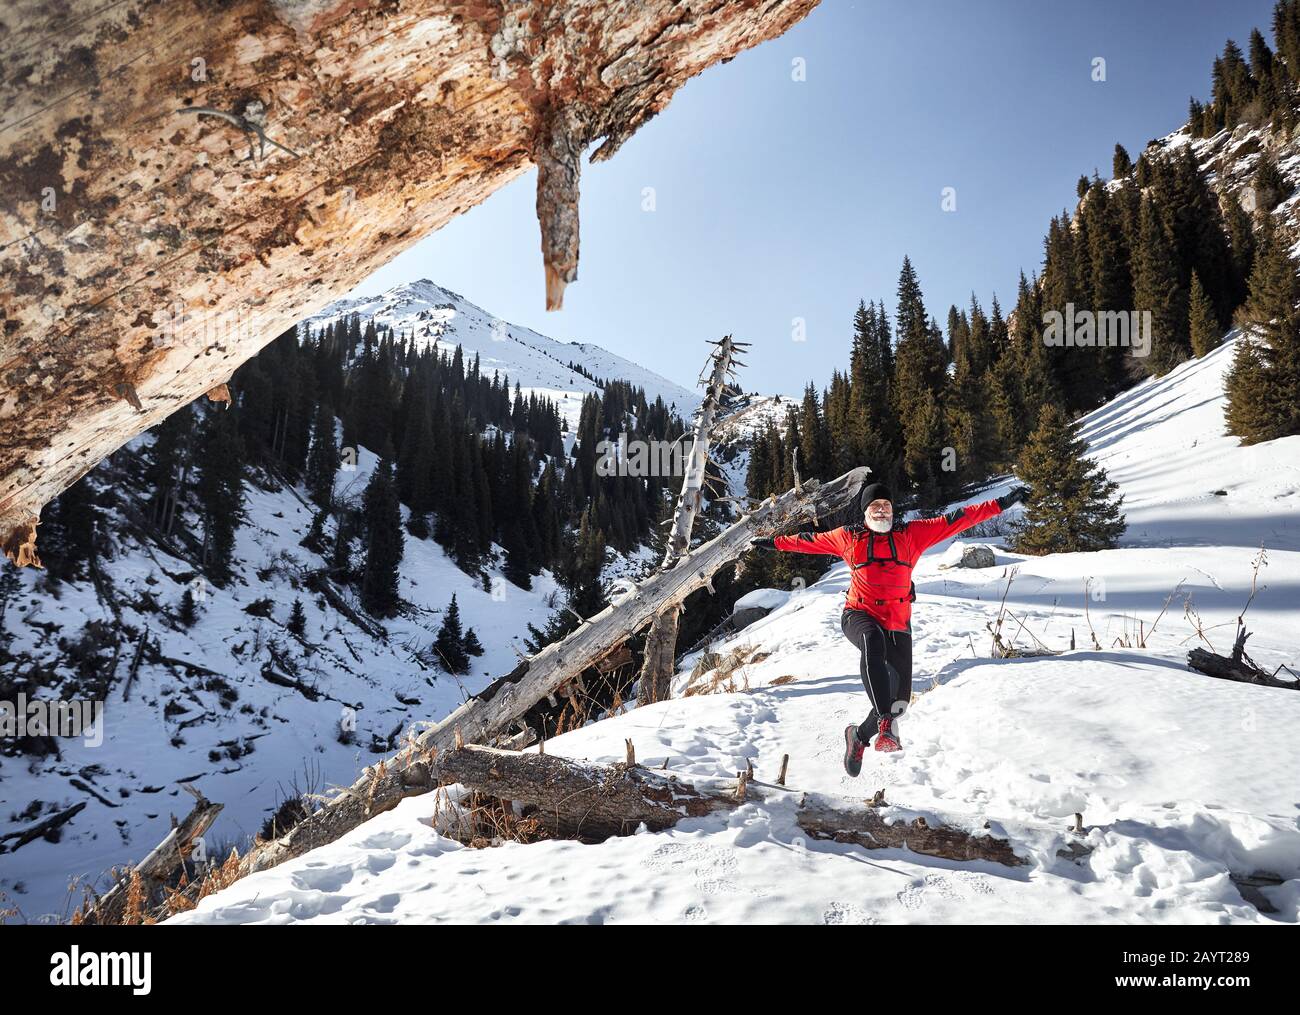 Old runner with grey beard and red jacket jumping near tree trunks at mountains in winter time. Skyrunning and trailrunning outdoor activity concept. Stock Photo